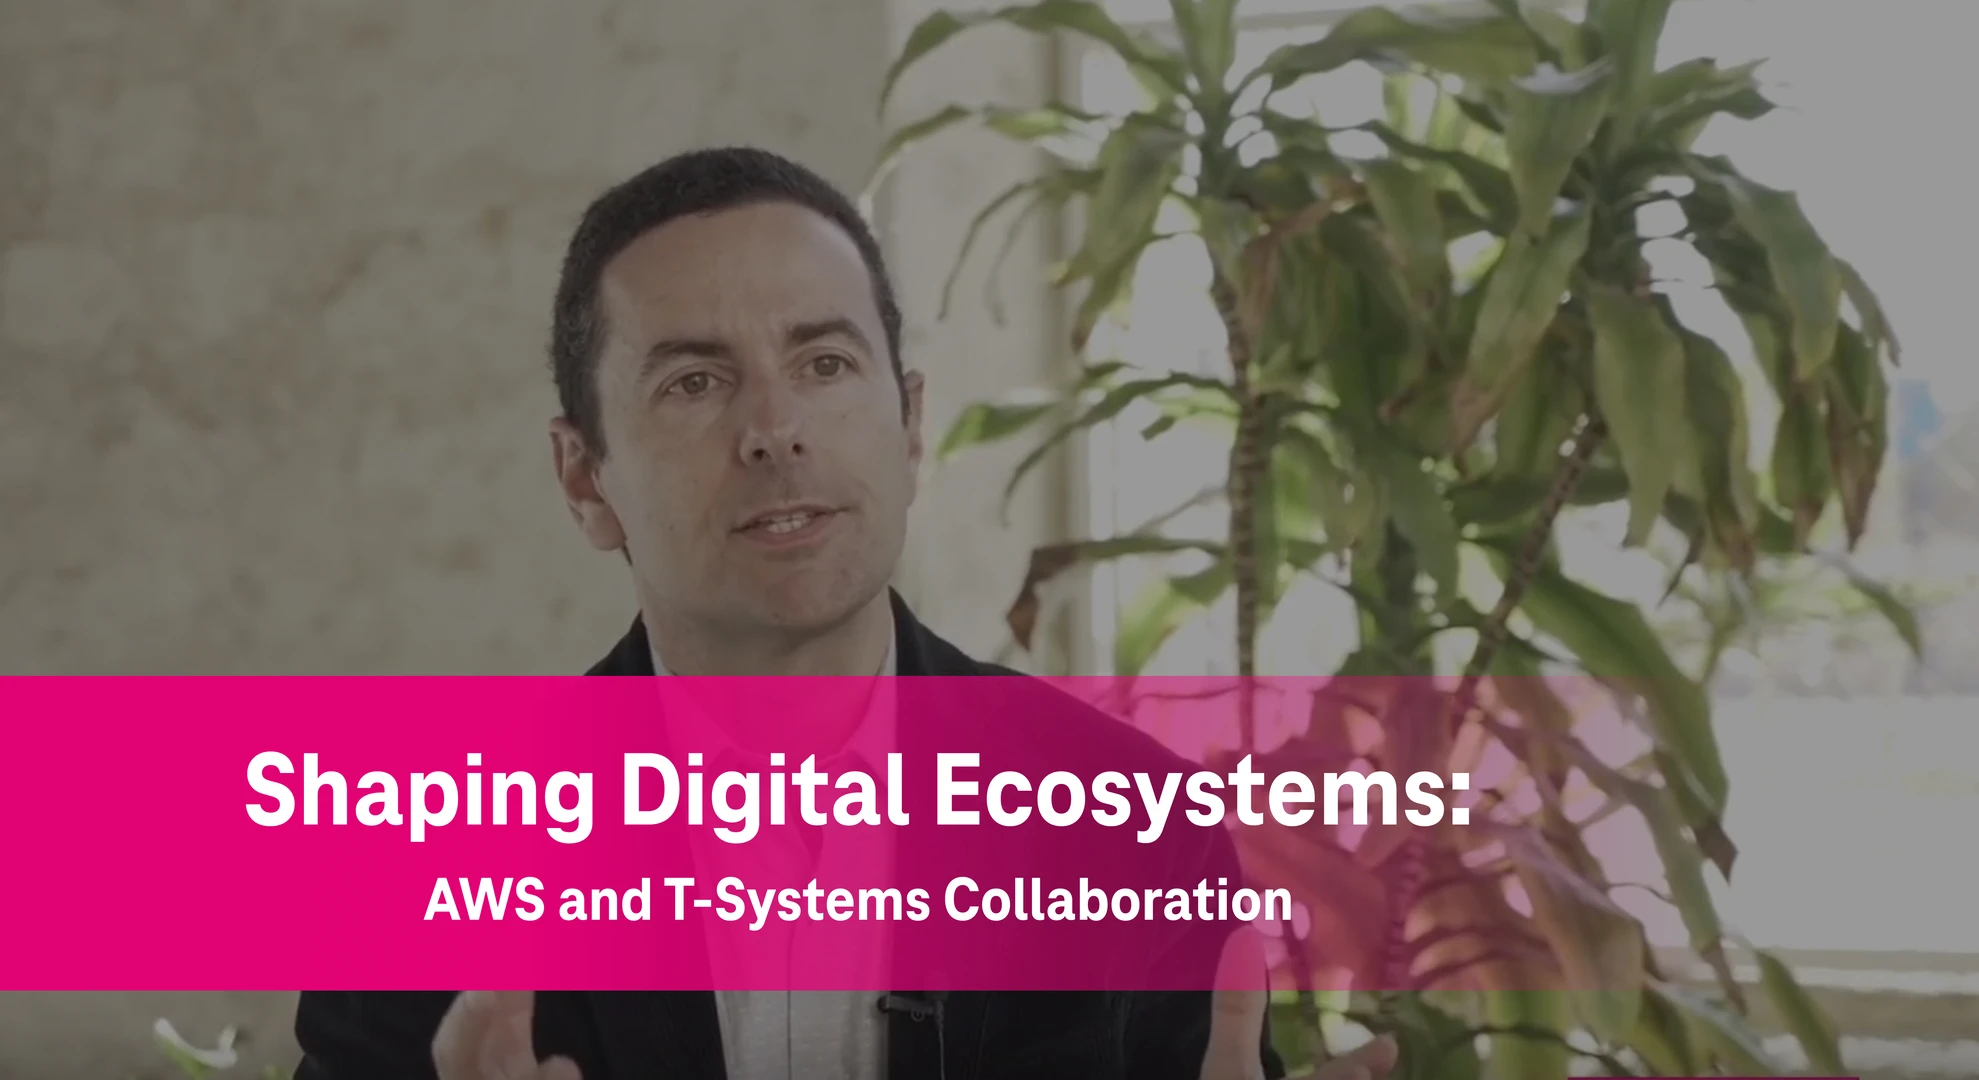 Shaping Digital Ecosystems: AWS and T-Systems Collaboration